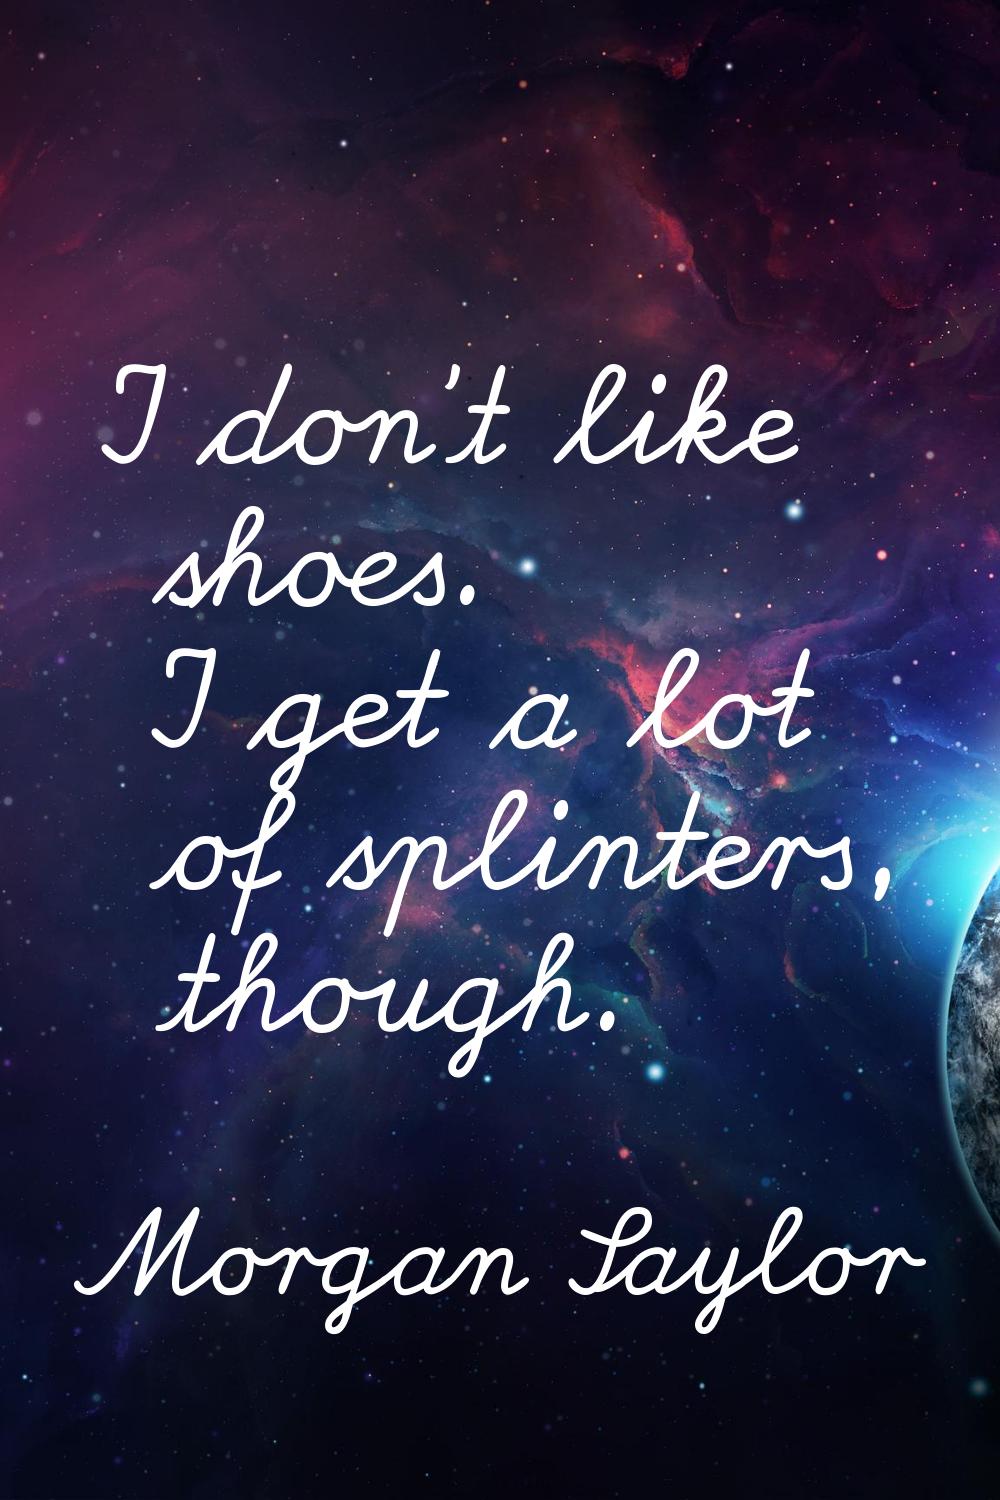 I don't like shoes. I get a lot of splinters, though.